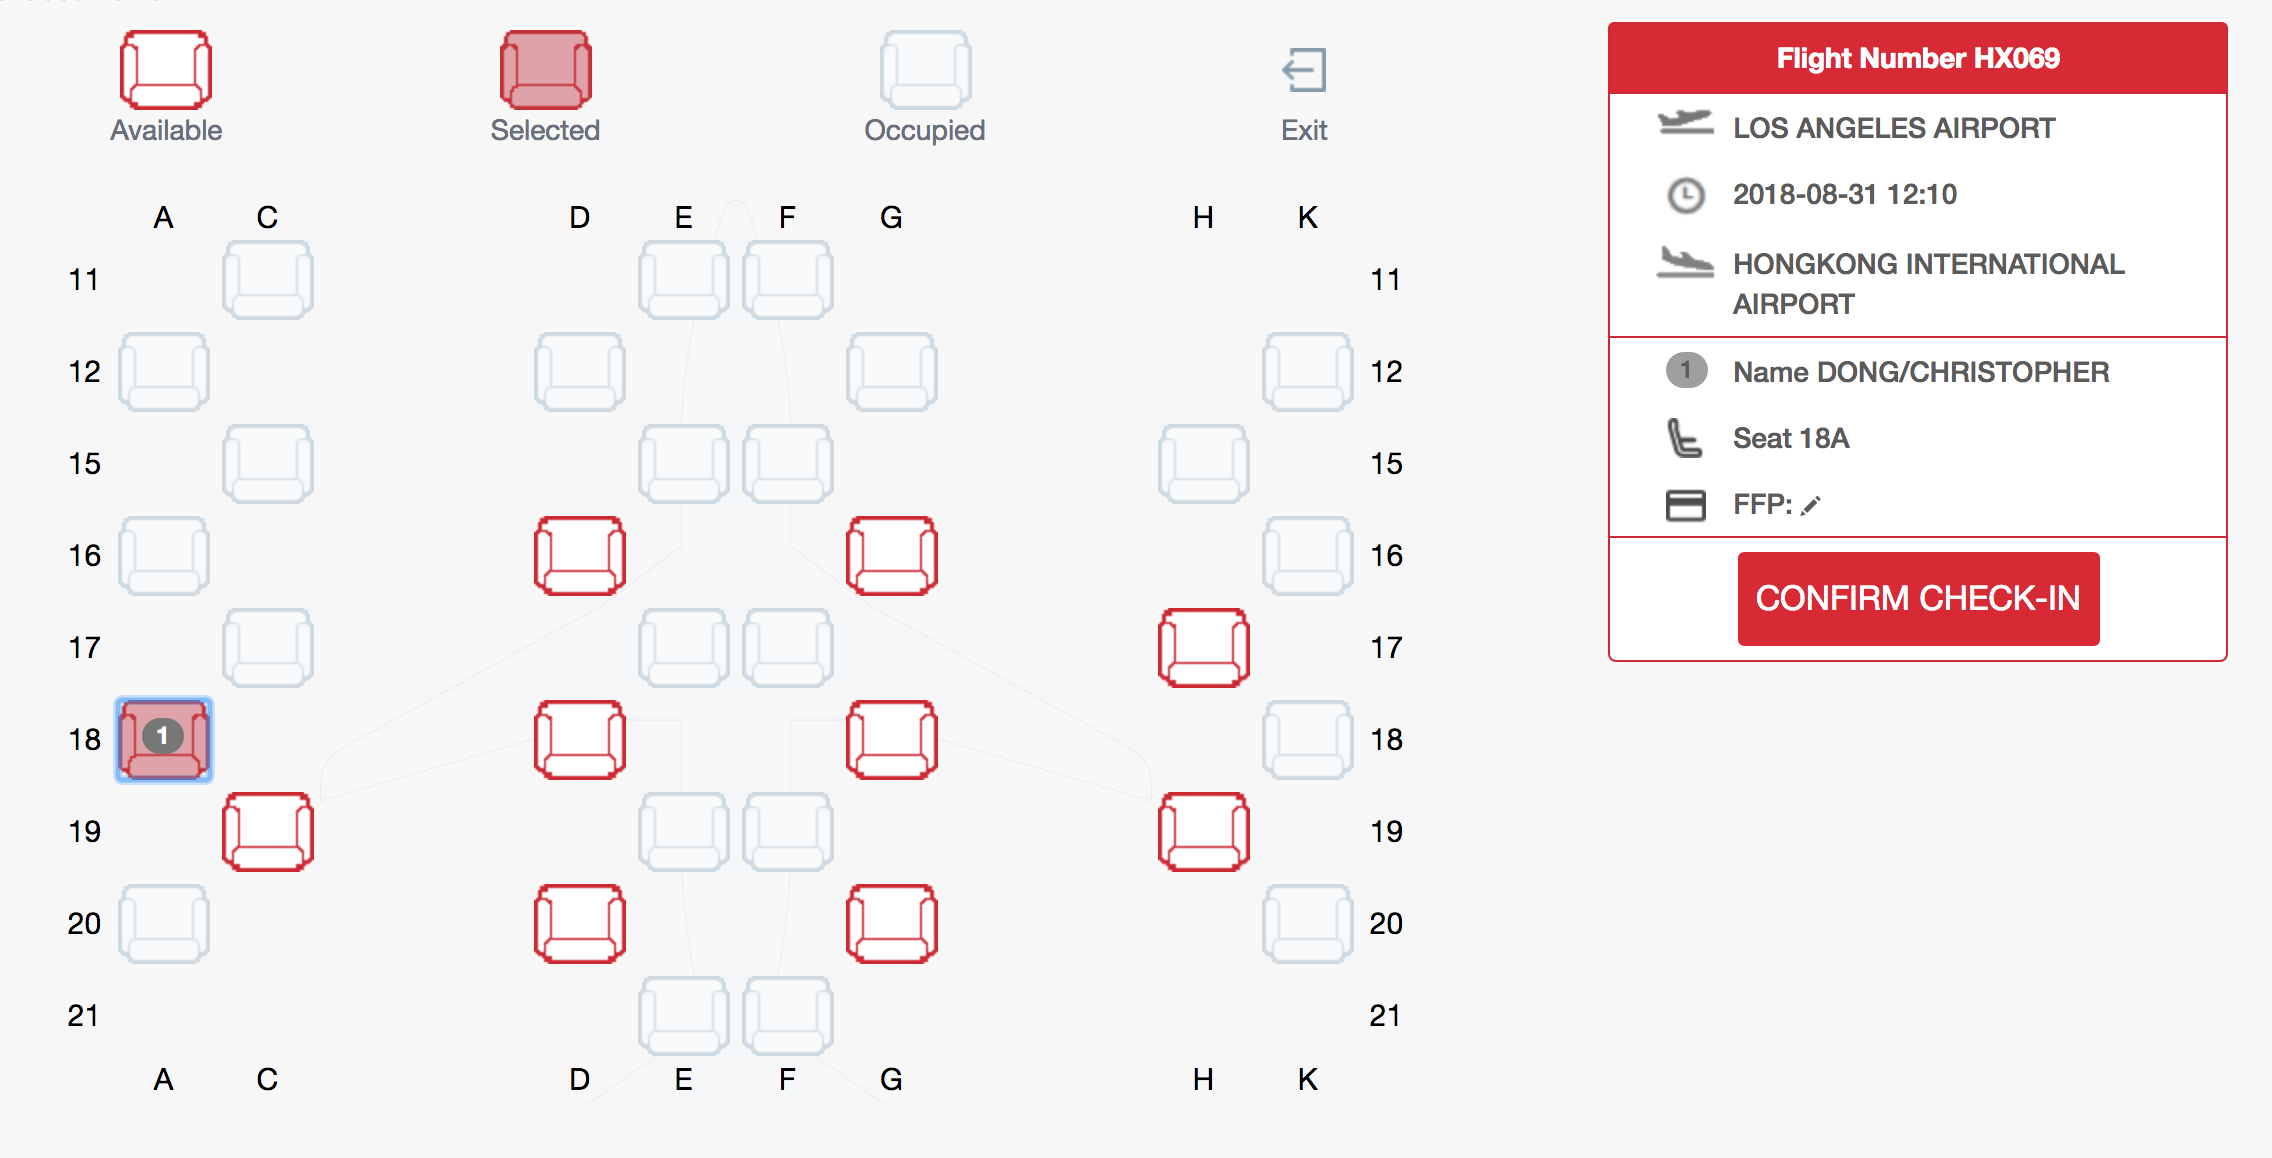 Seat map the night before my flight. | Image by Hong Kong Airlines